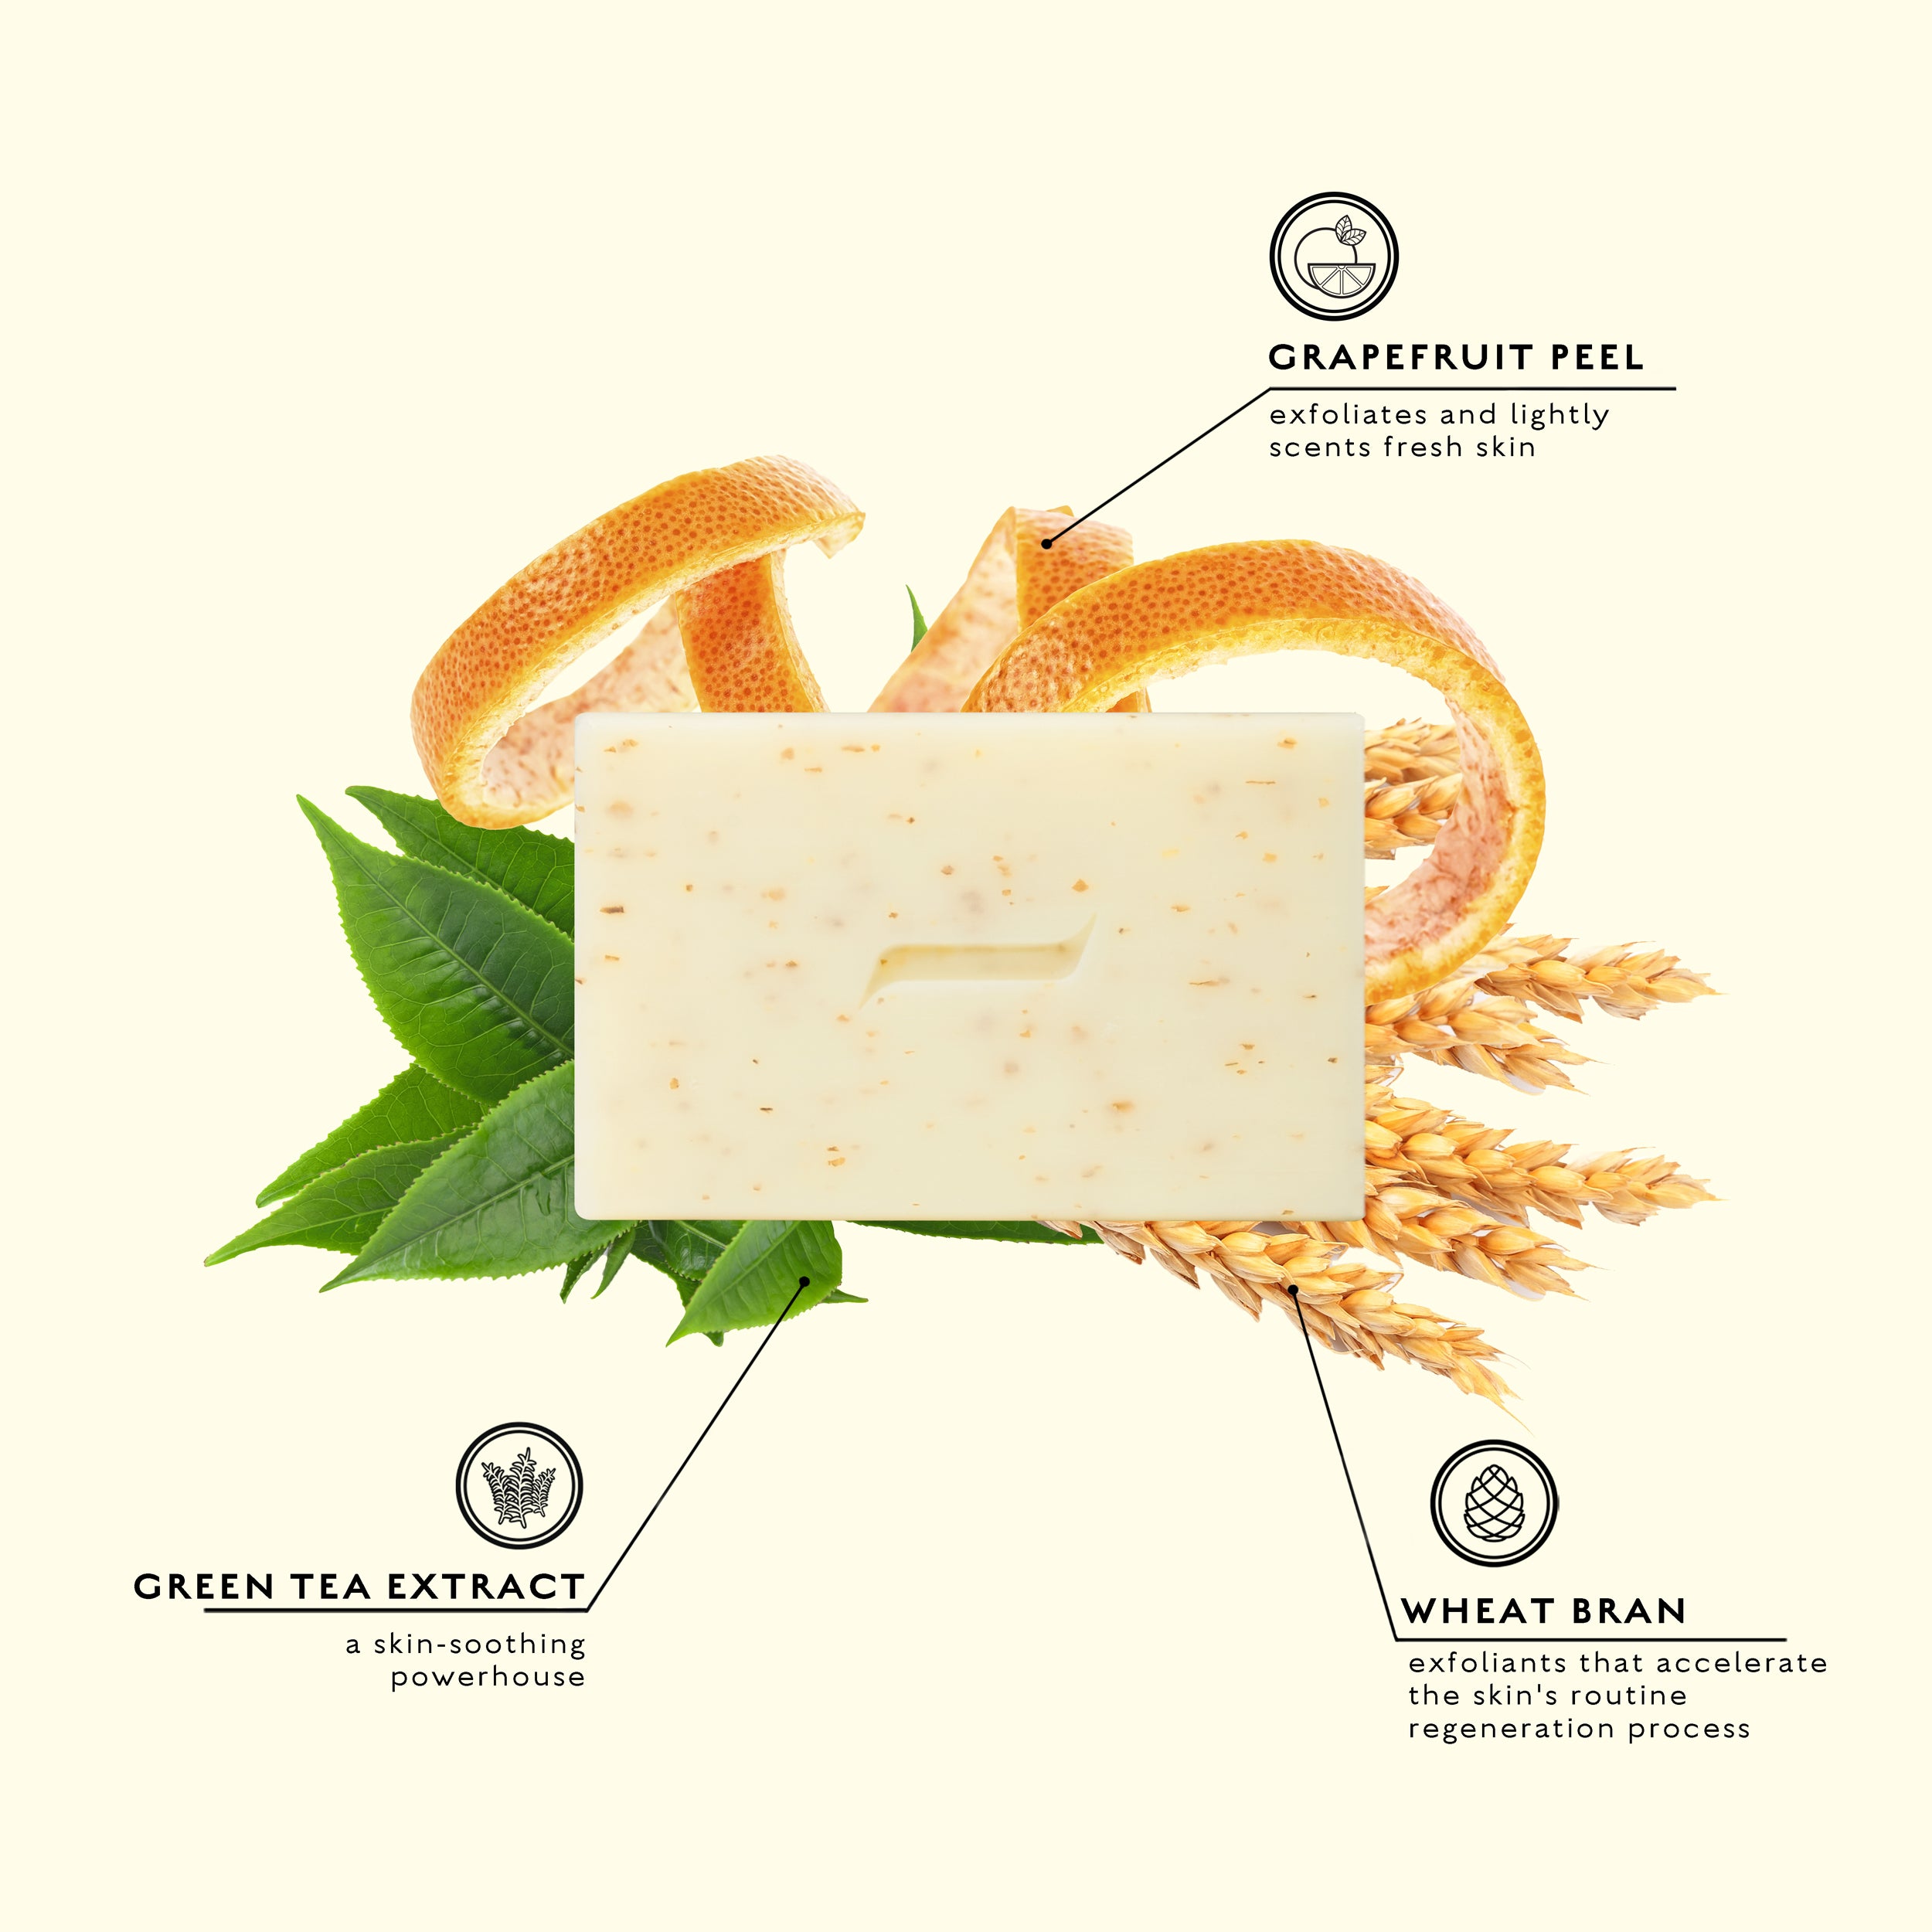 Caswell-Massey Heritage Body Scrub Bar Exfoliating Soap: bar soap shown with images of wheat bran, green tea leaves, and orange peel behind it to represent the key ingredients